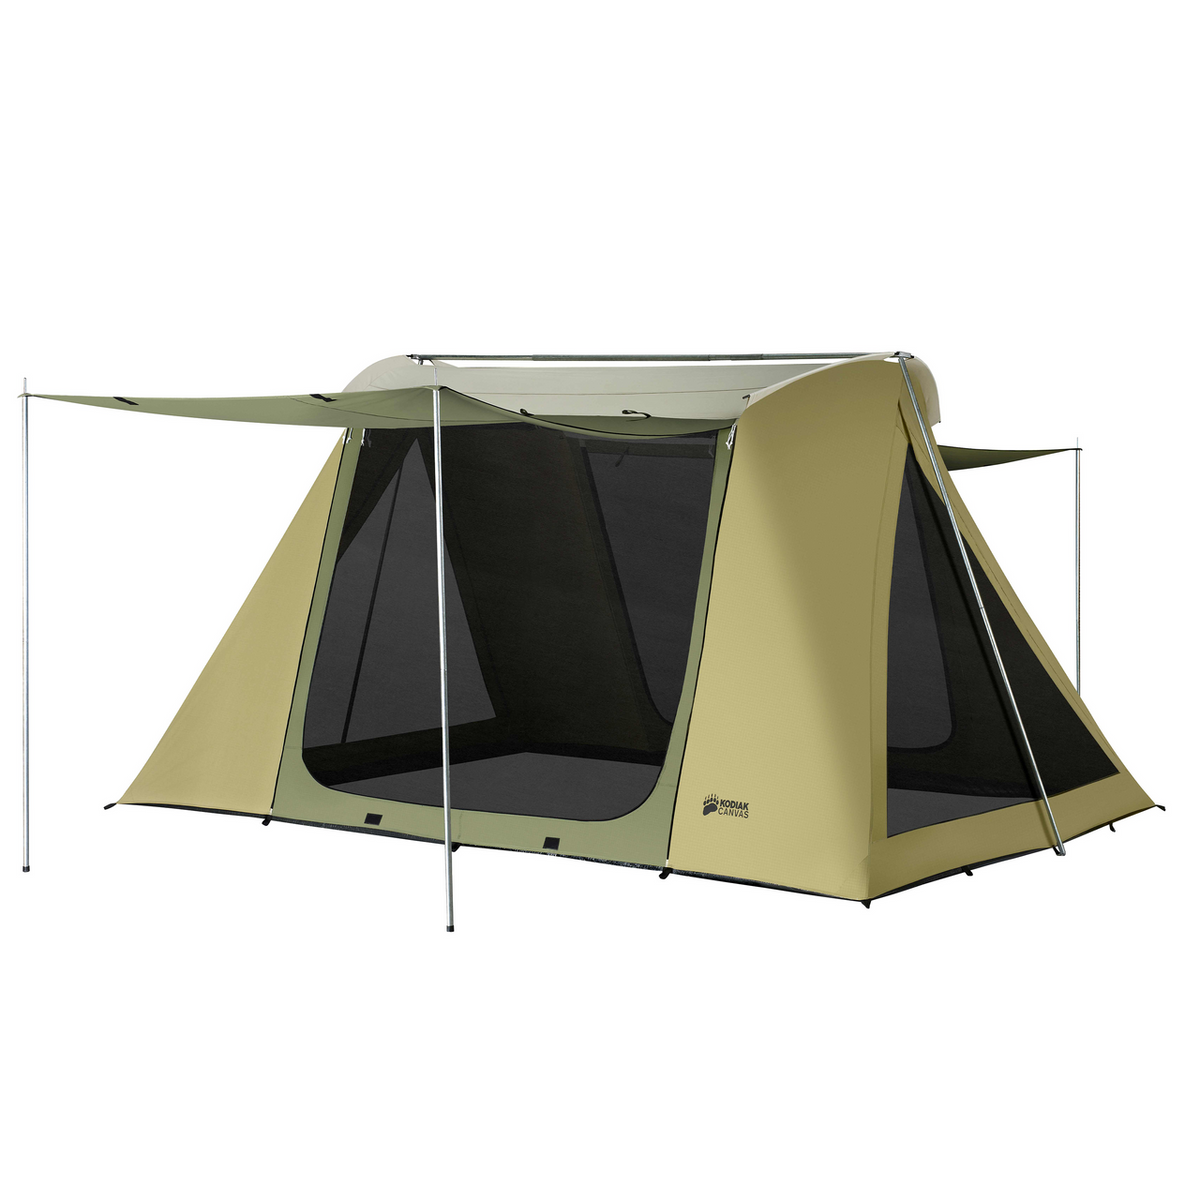 6 Person Straight Wall Cabin Tent with Screen Room 10' x 9